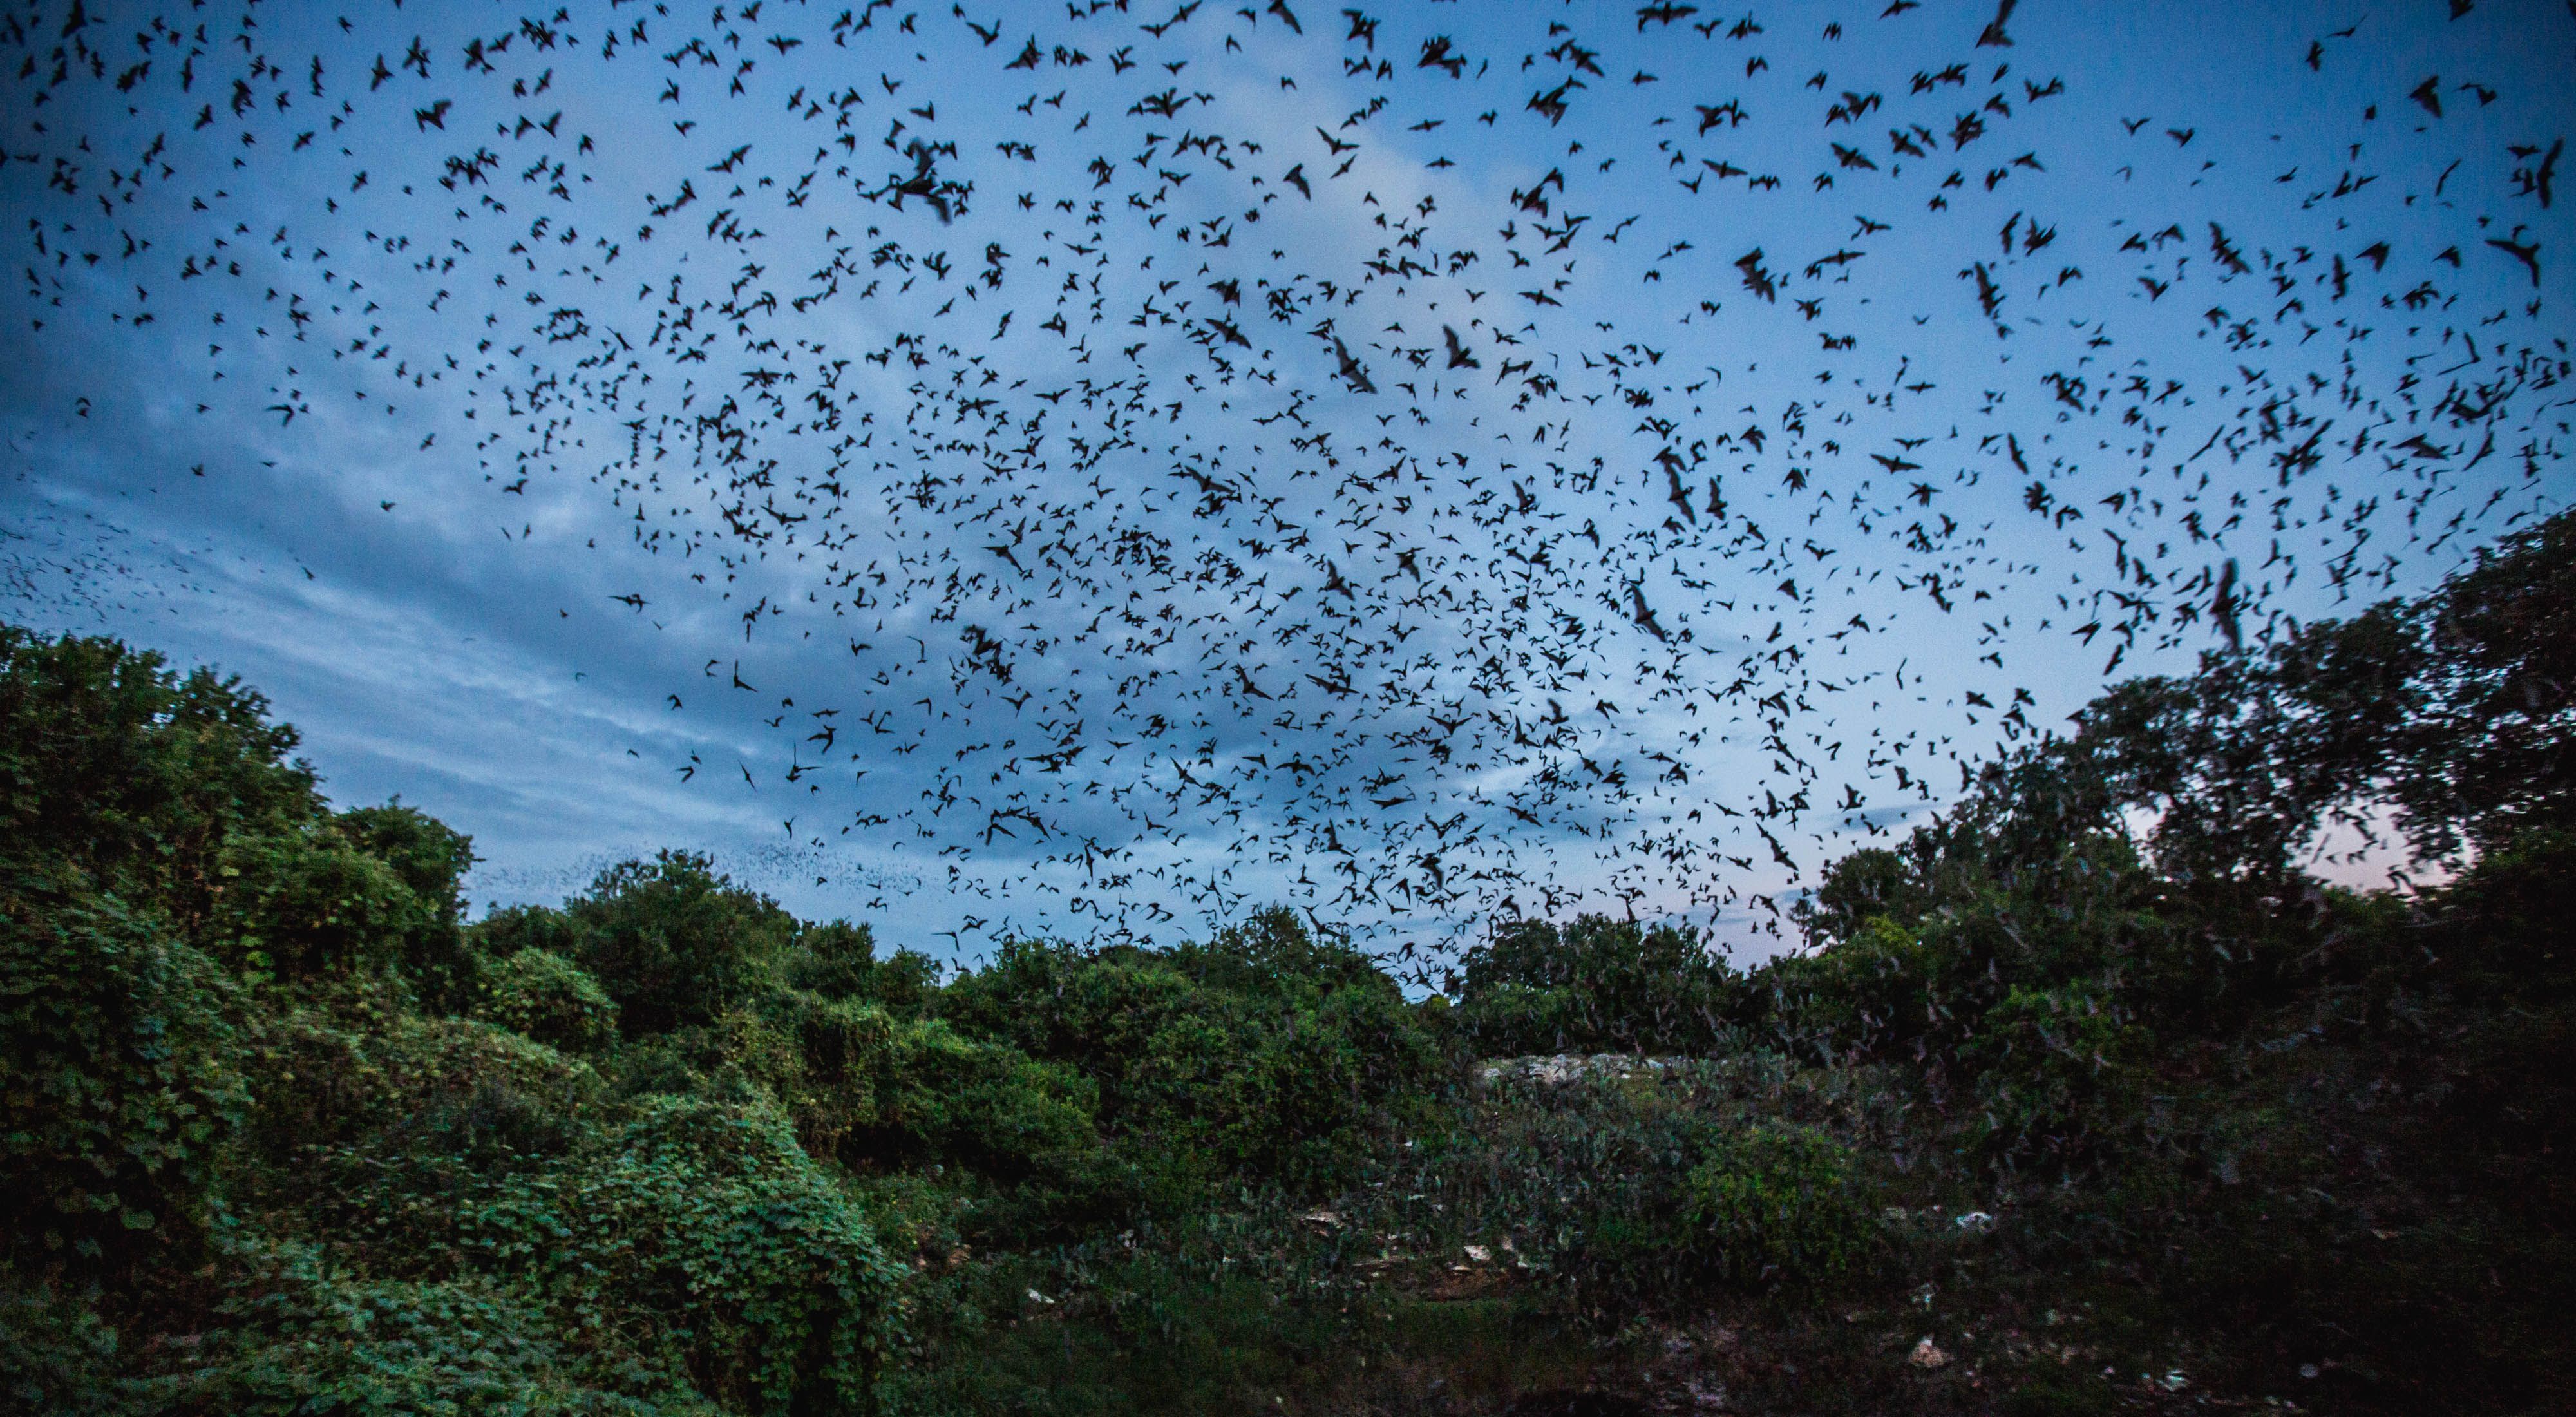 Thousands of Mexican free-tailed bats emerge from the Bracken Cave in Texas at dusk to feed on insects; the sky is filled with a swarm of bats.